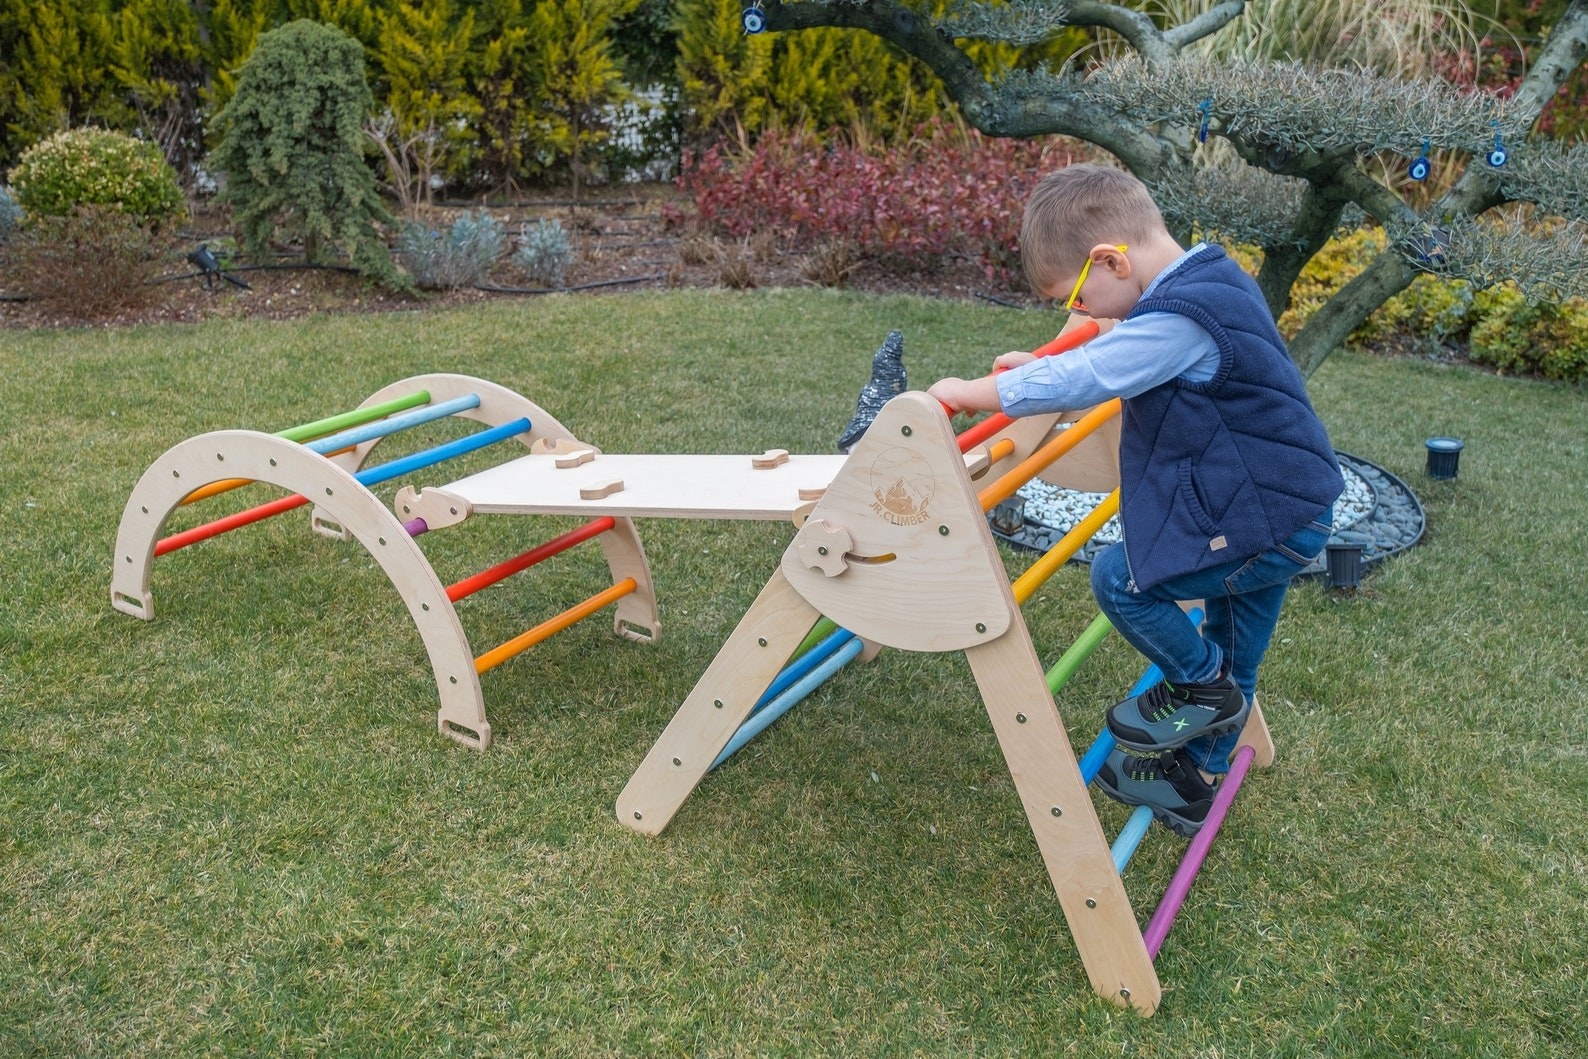 Two kids climbing the wooden triangle and ladder set